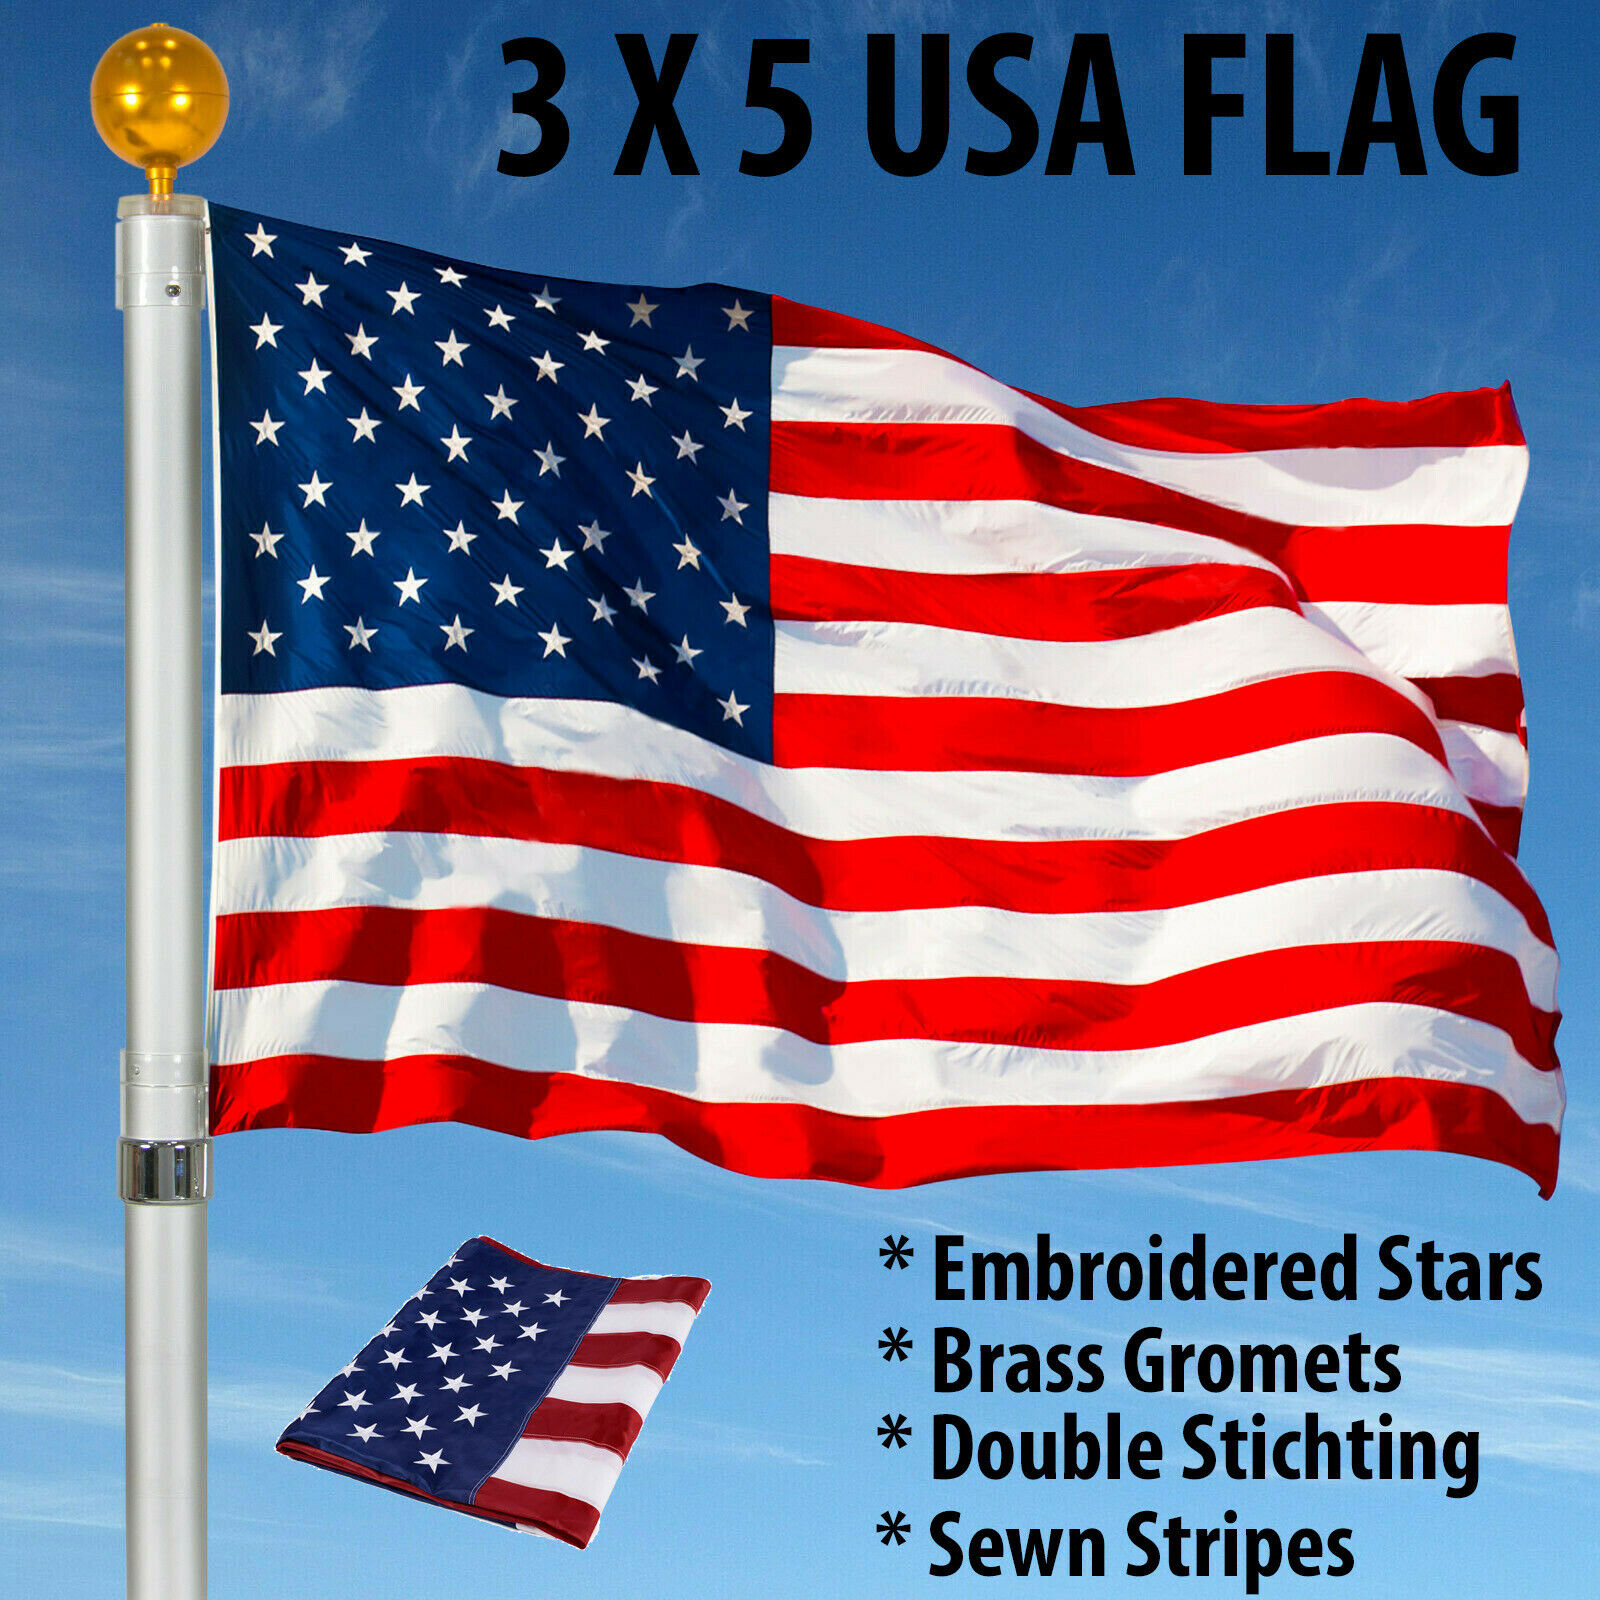 3'x5' Ft American Flag Us Usa | Embroidered Stars| Sewn Stripes| Brass Grommets